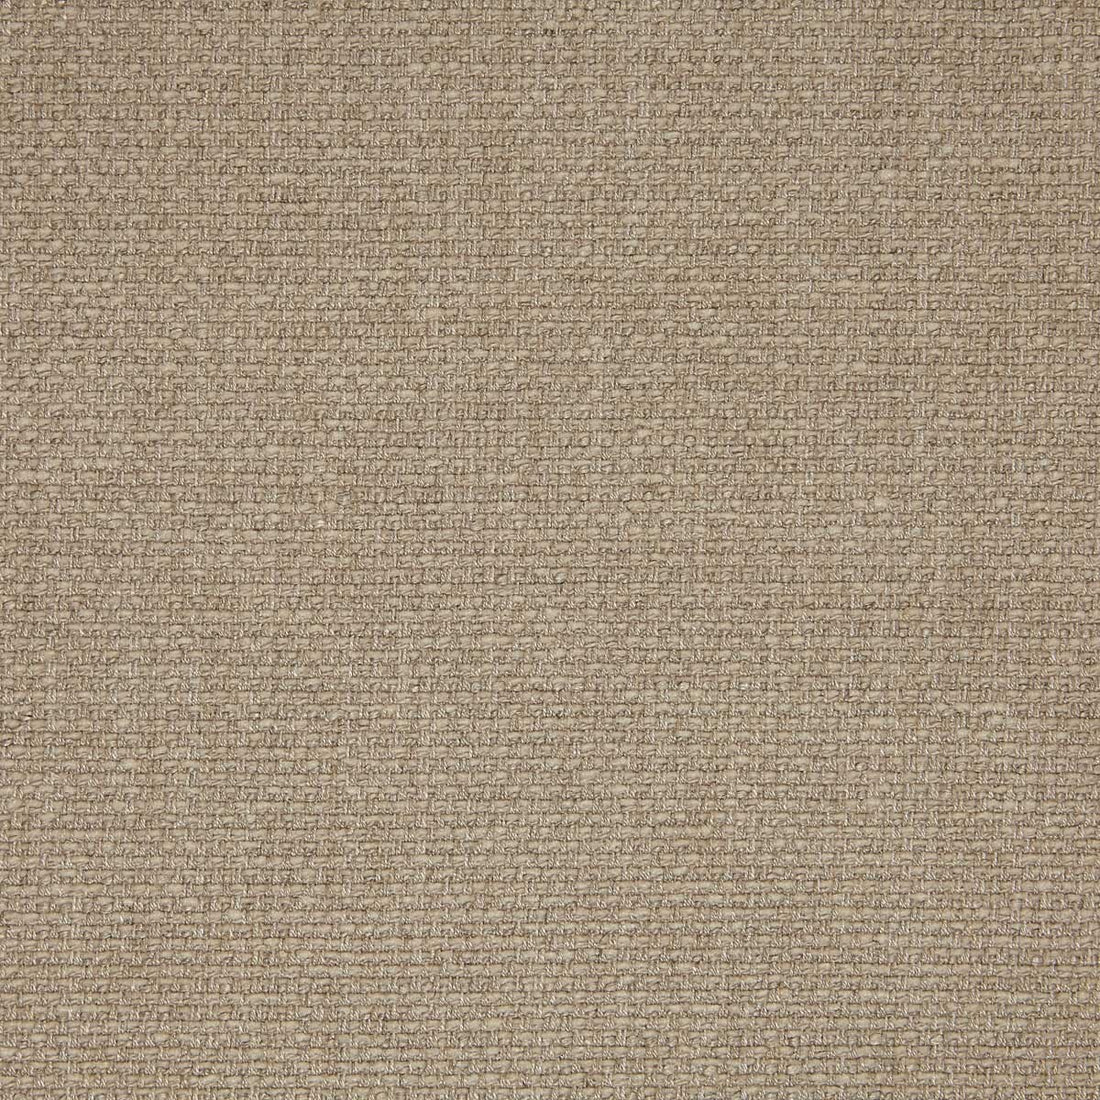 Godai fabric in 16 color - pattern LZ-30349.16.0 - by Kravet Design in the Lizzo collection